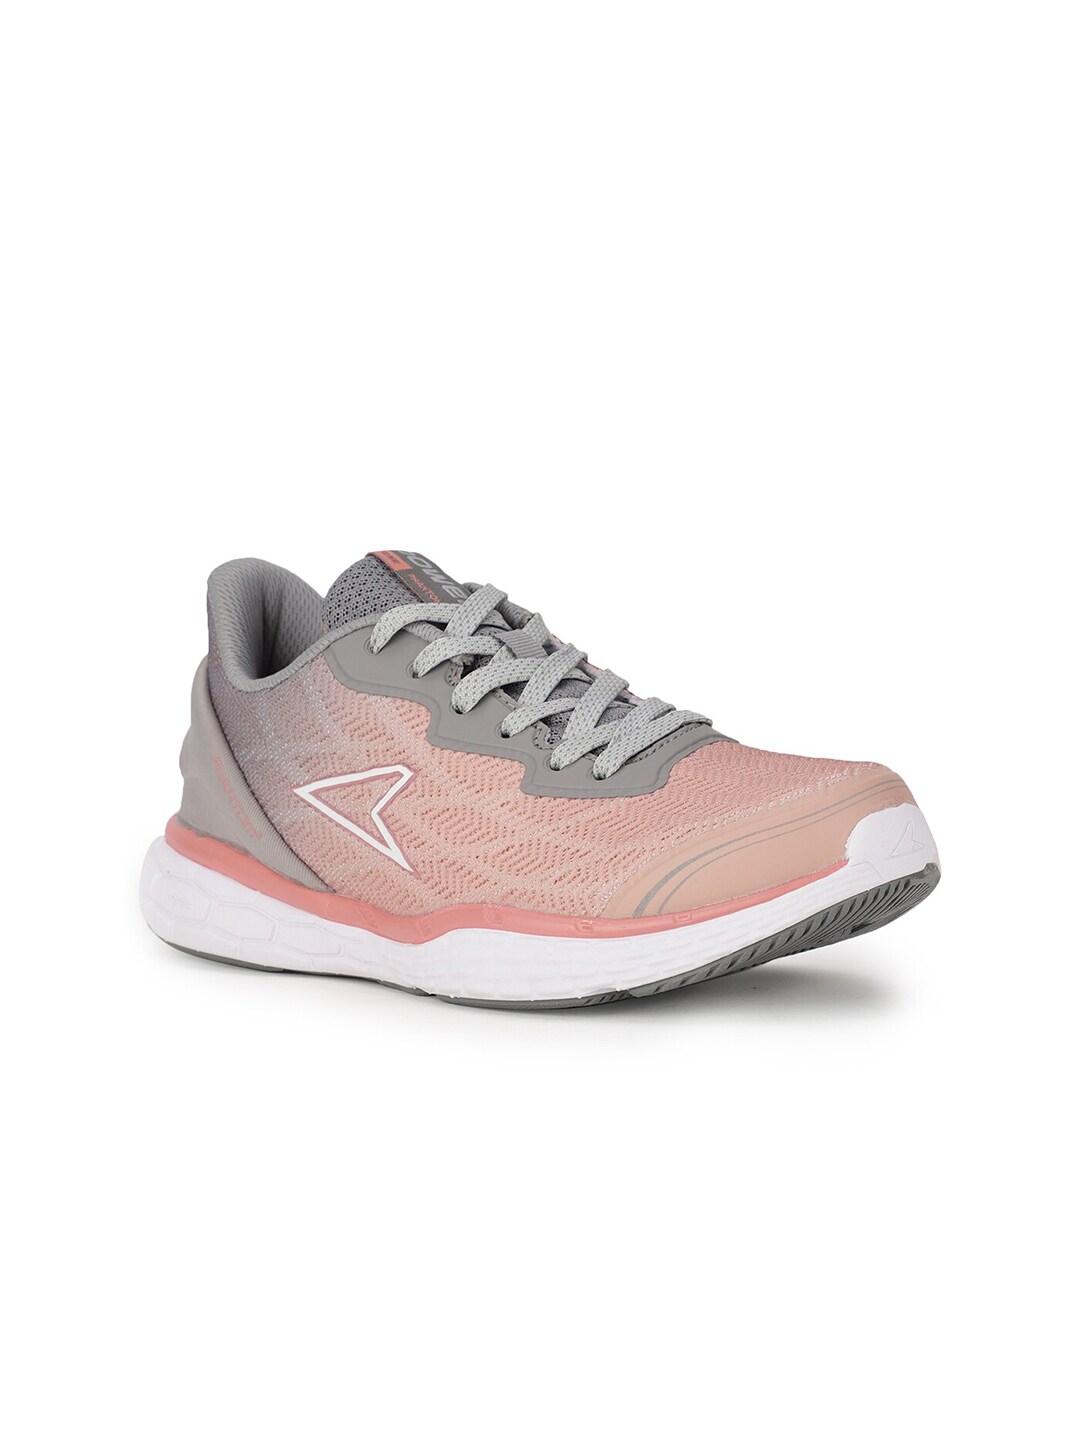 Power Women Grey Textile Running Non-Marking Shoes Price in India